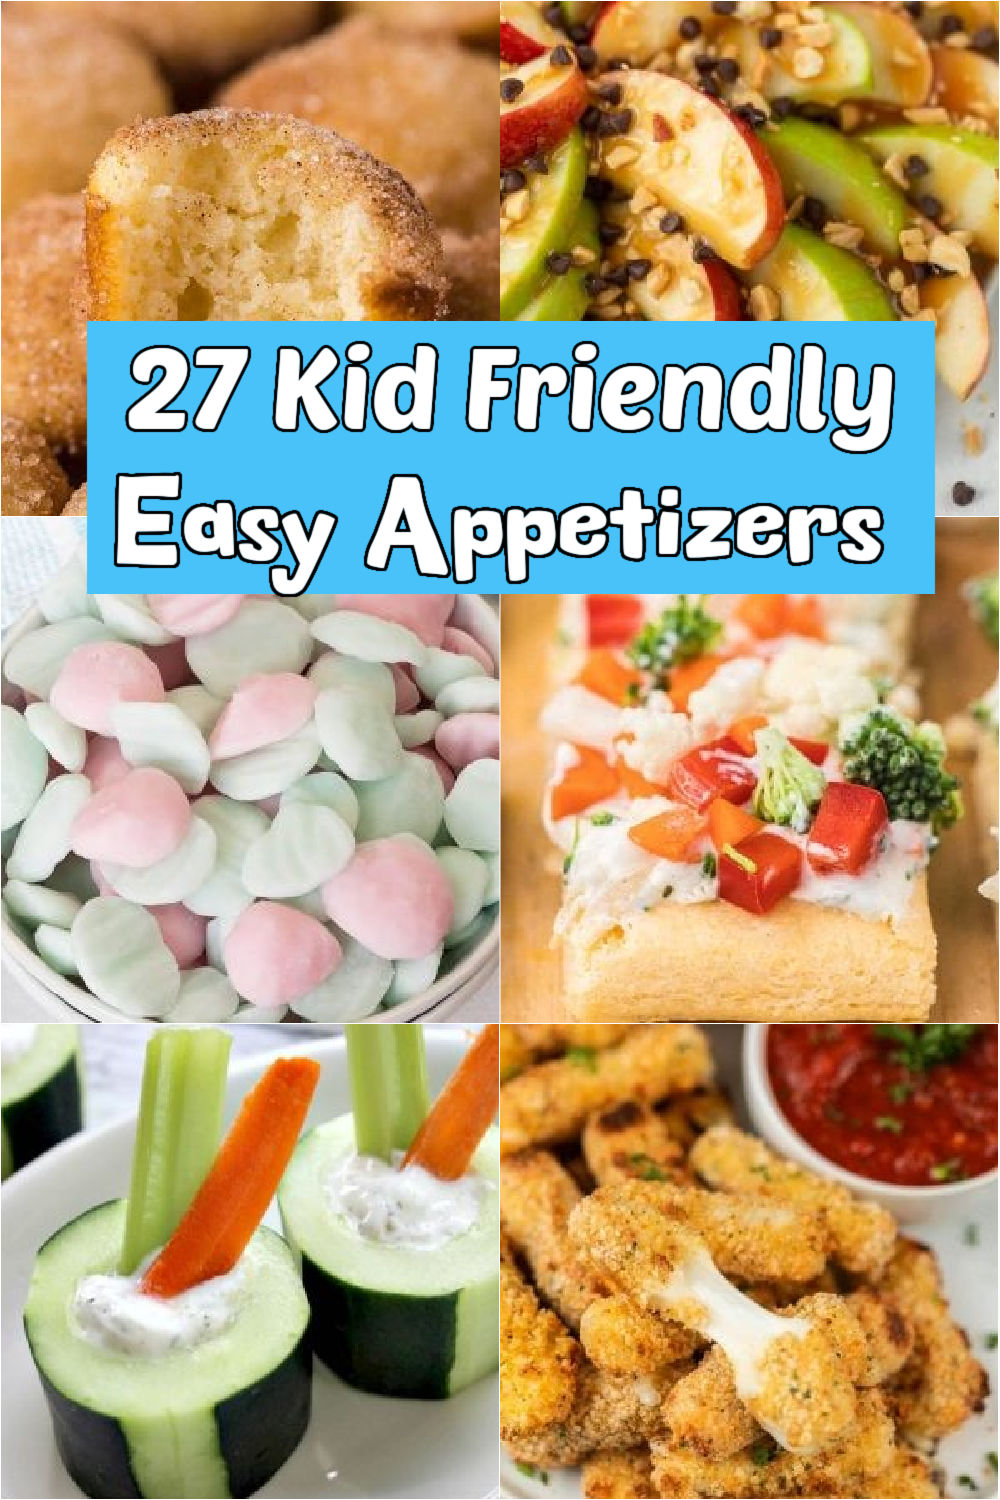 This assortment of 27 kid friendly appetizers will be a hit at your next get together.  Everyone will enjoy these easy appetizers for kids that you can serve on any occasion. #eatingonadime #kidfriendlyappetizers #appetizers 